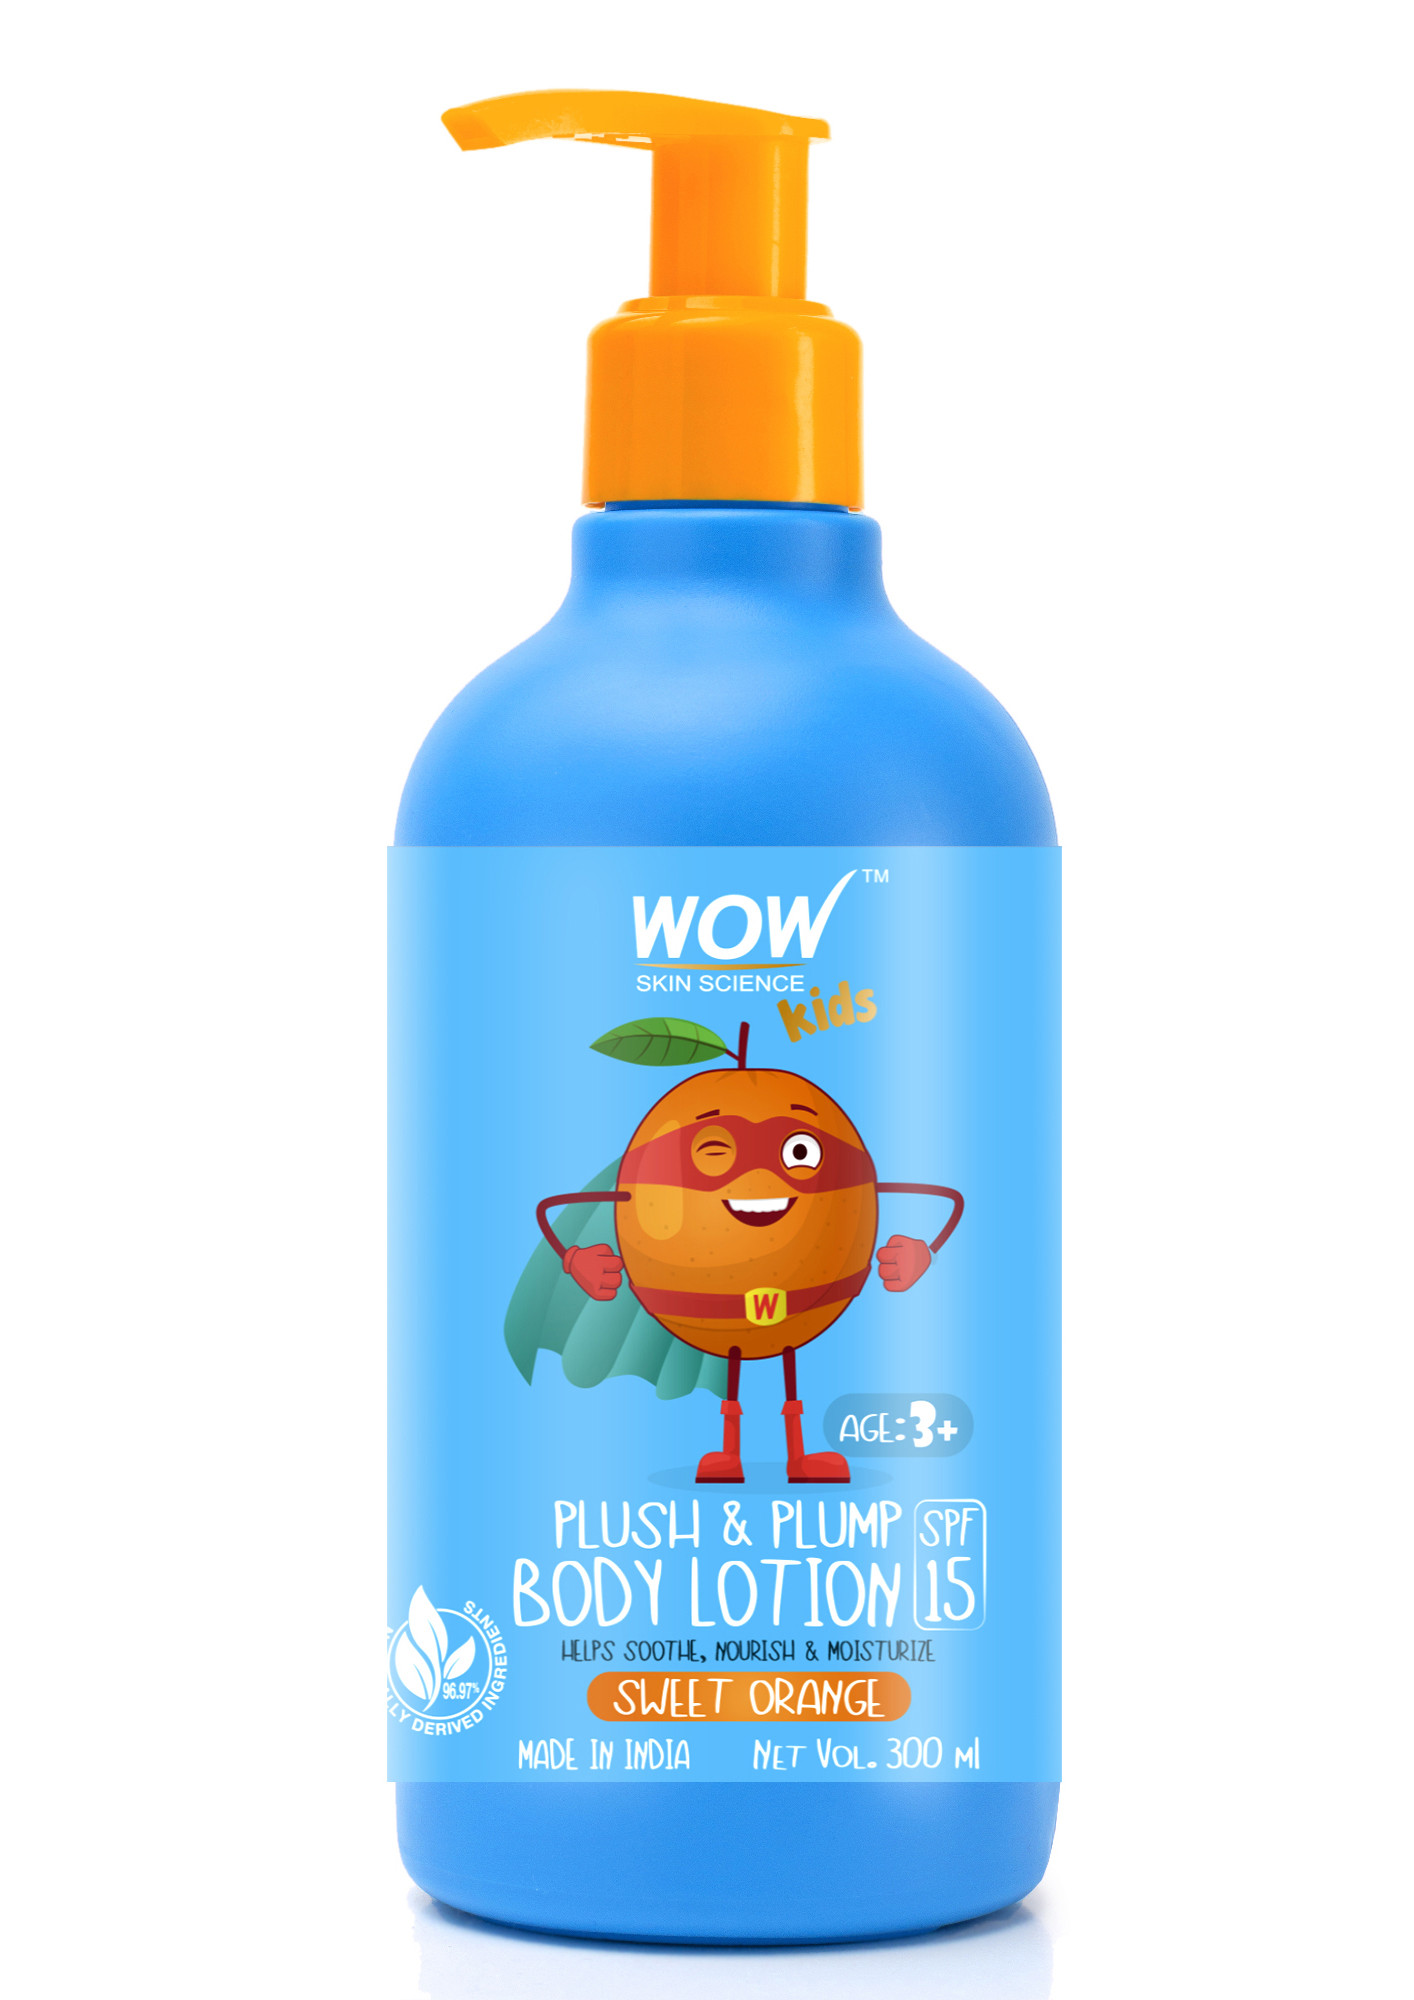 WOW Skin Science Kids Plush & Plump Body Lotion - Sweet Orange - SPF 15 - No Parabens, Mineral Oil, Silicones & Color - 300mL